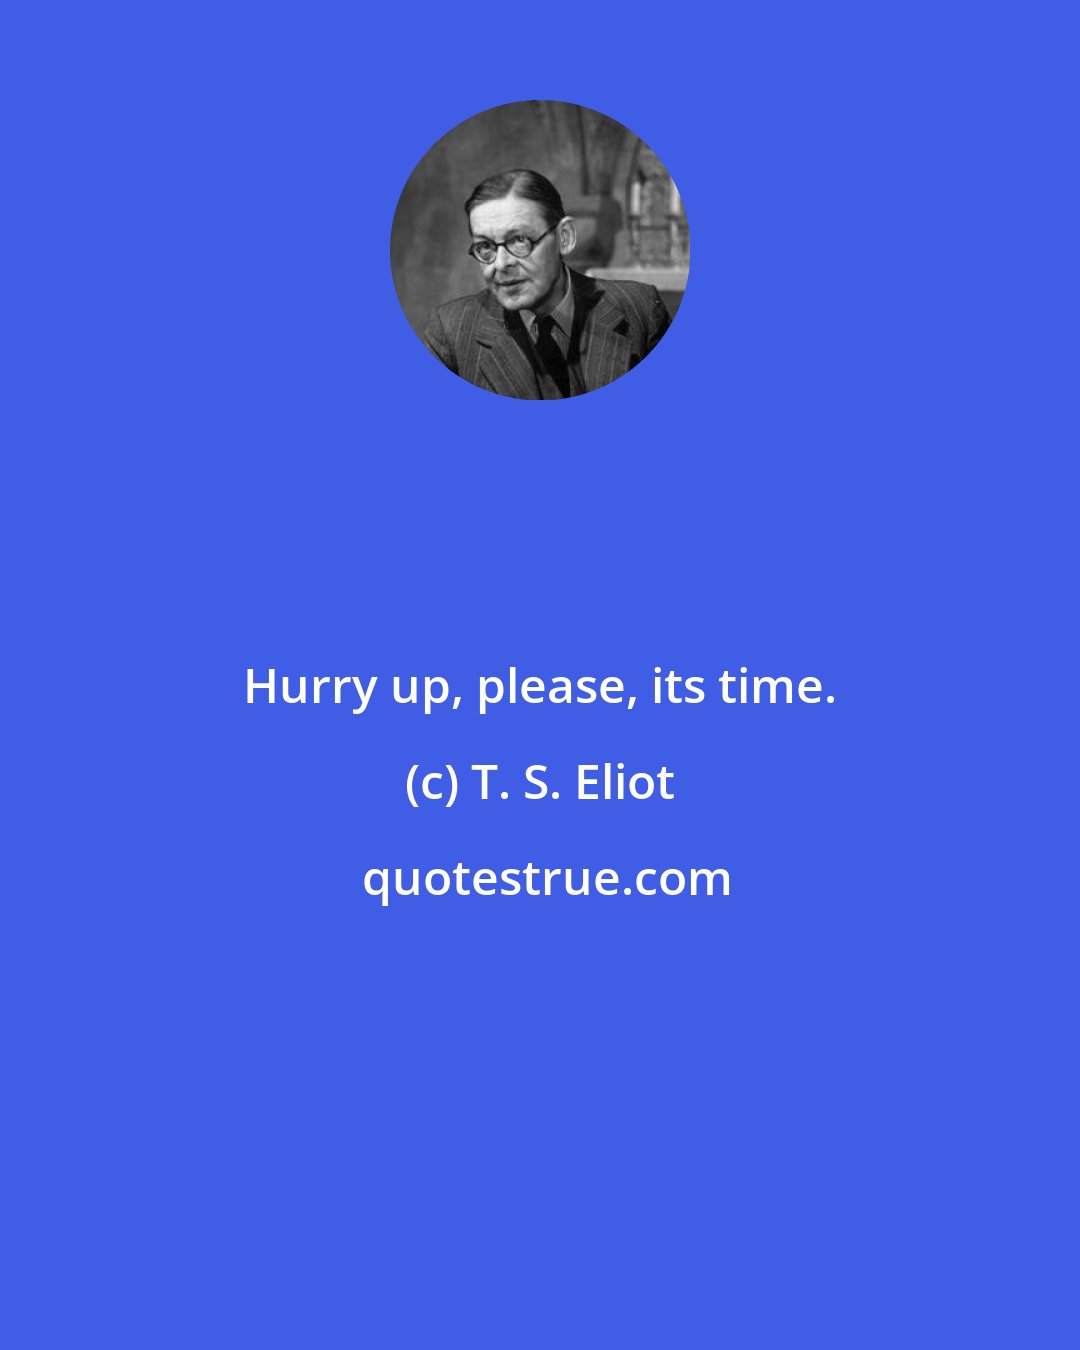 T. S. Eliot: Hurry up, please, its time.